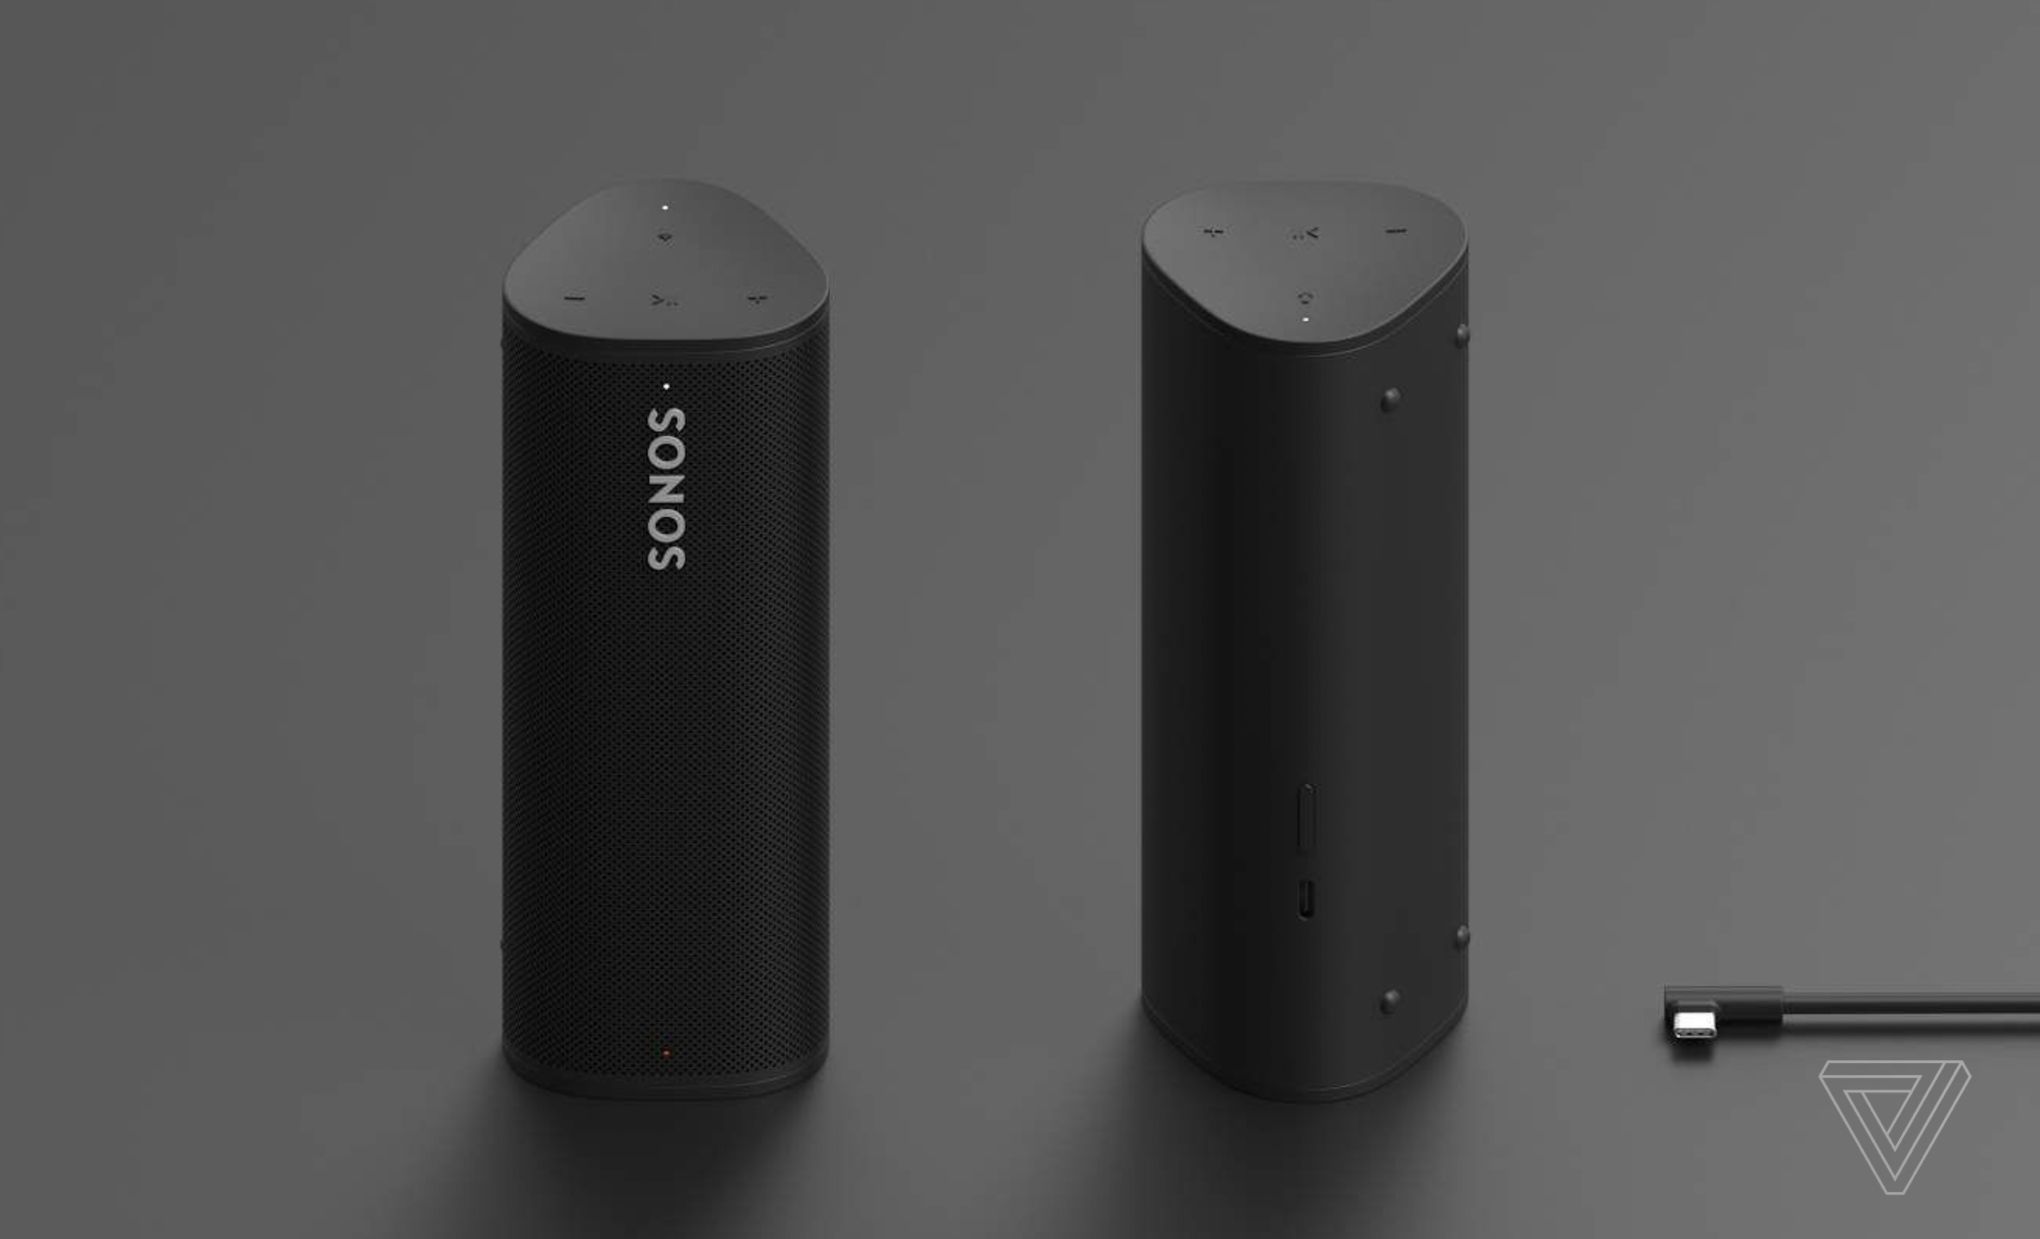 Sonos Roam is the new portable speaker to be launched next Tuesday, according to leak photo 2